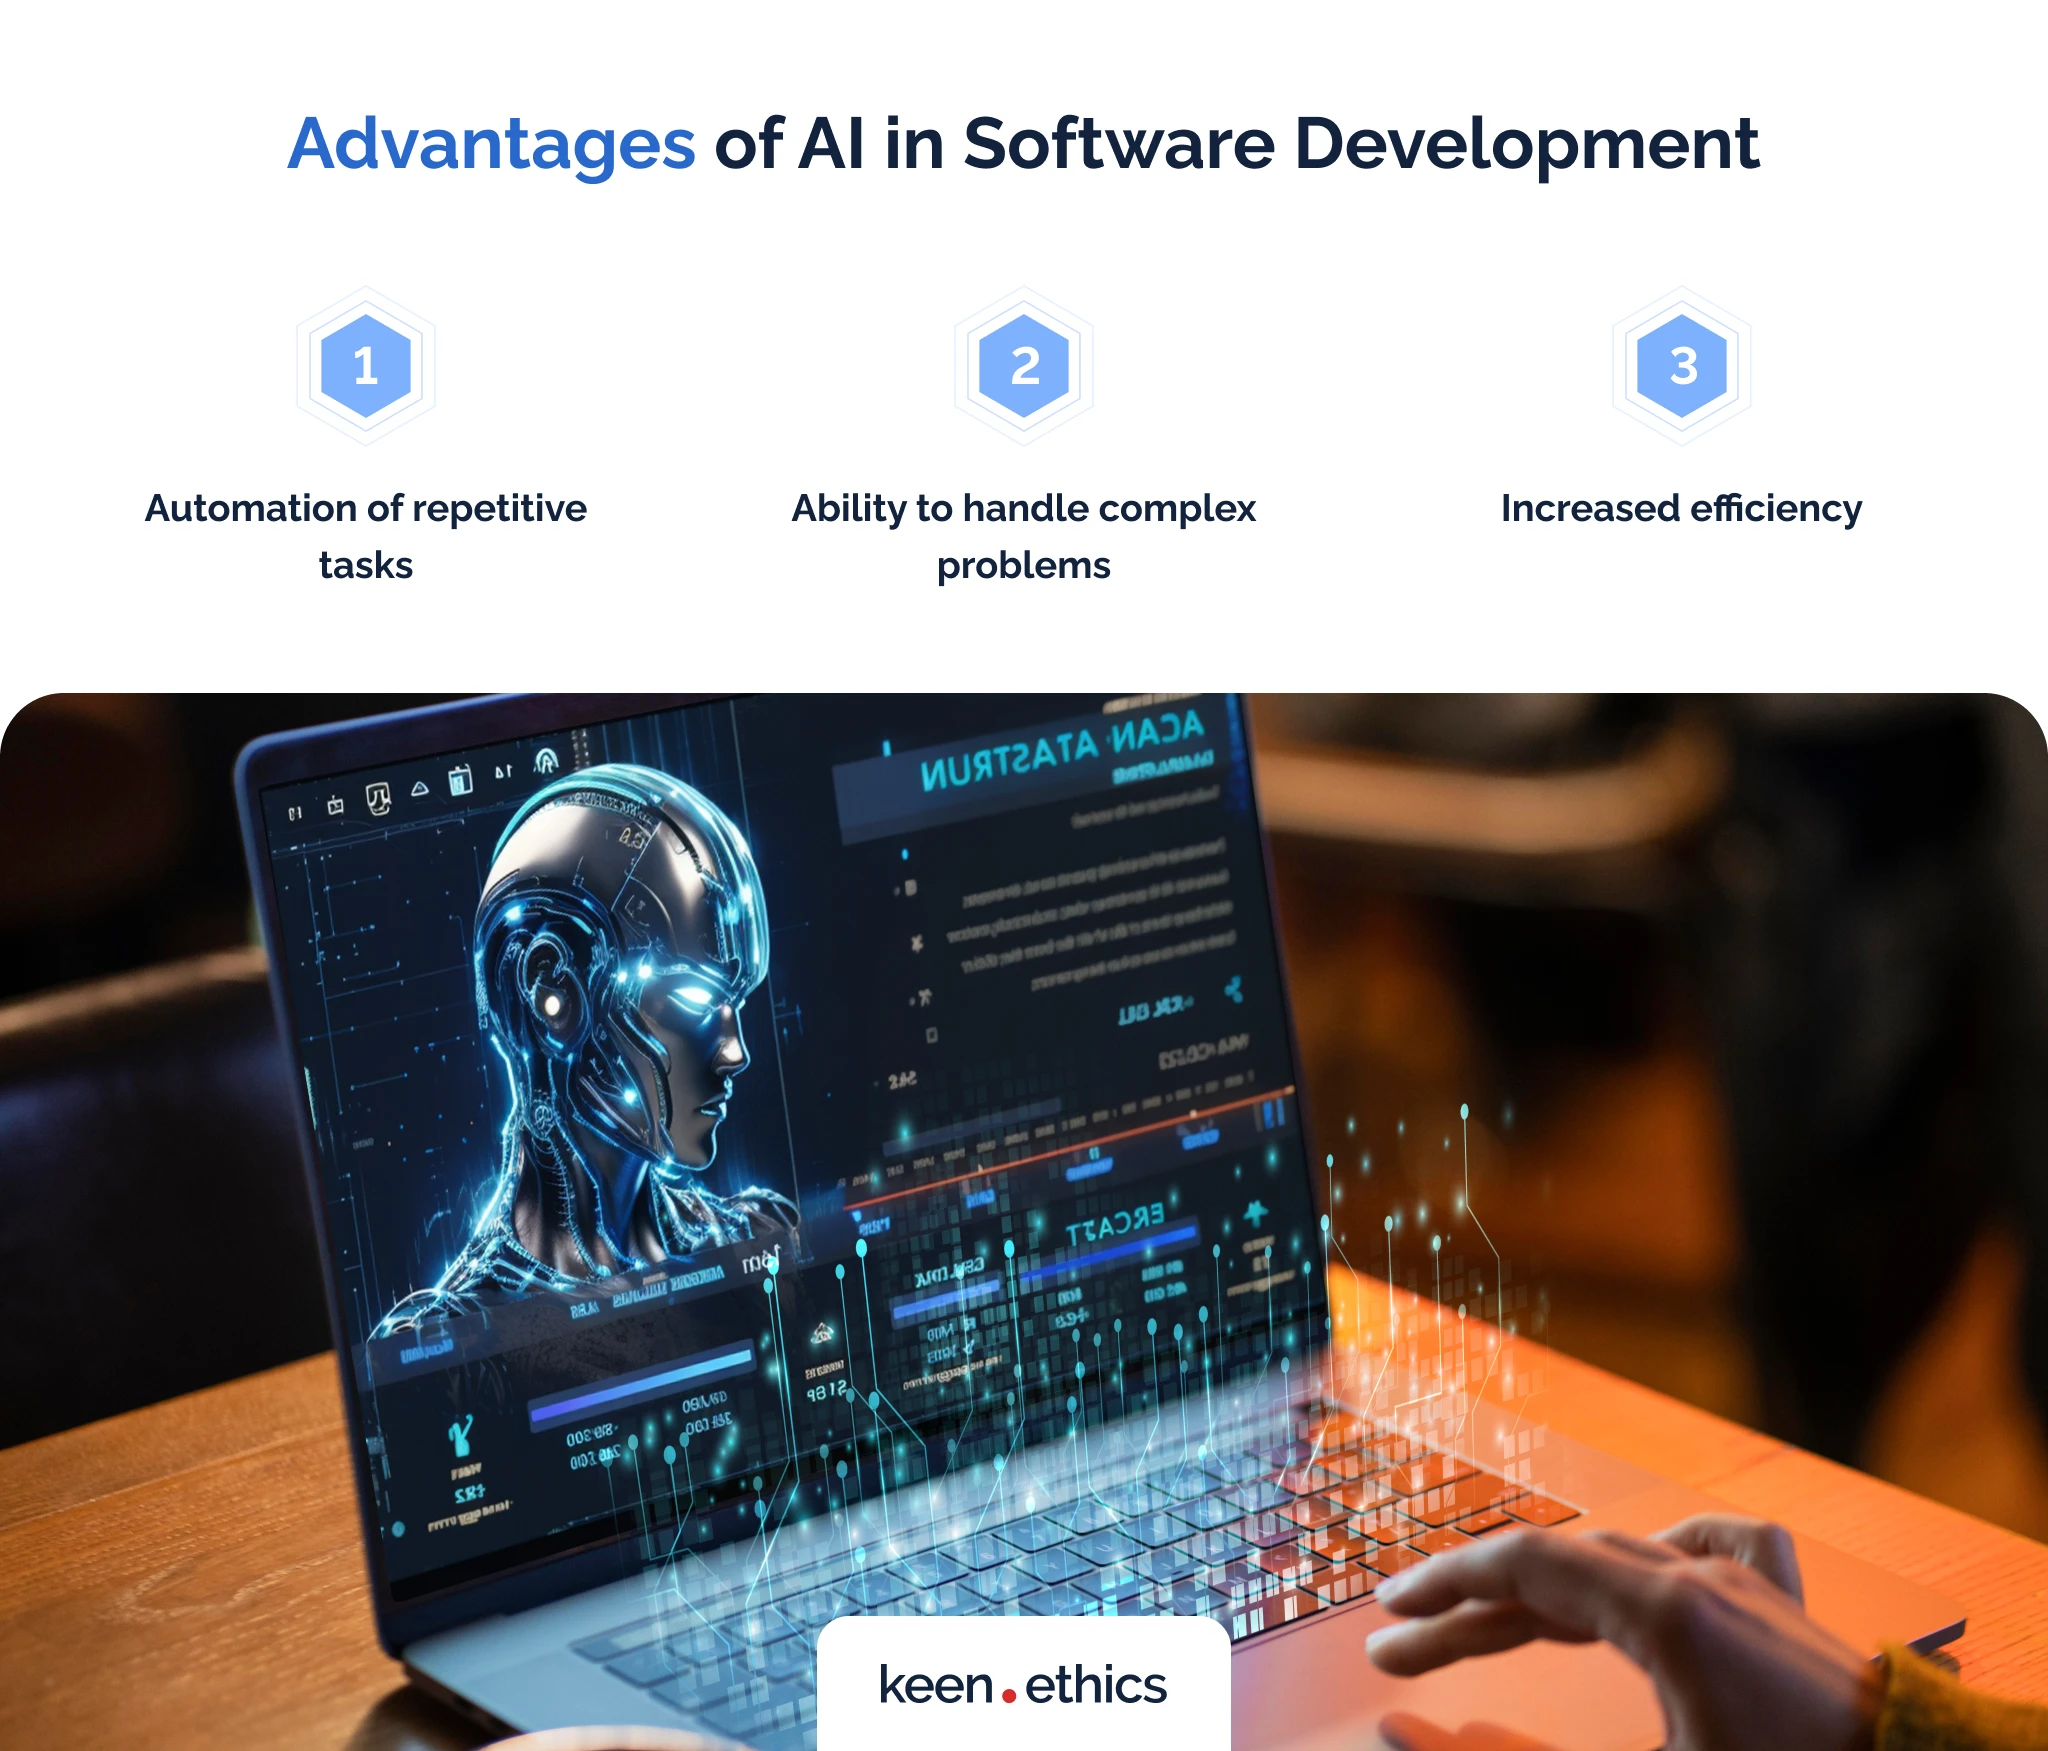 Advantages of AI in software development